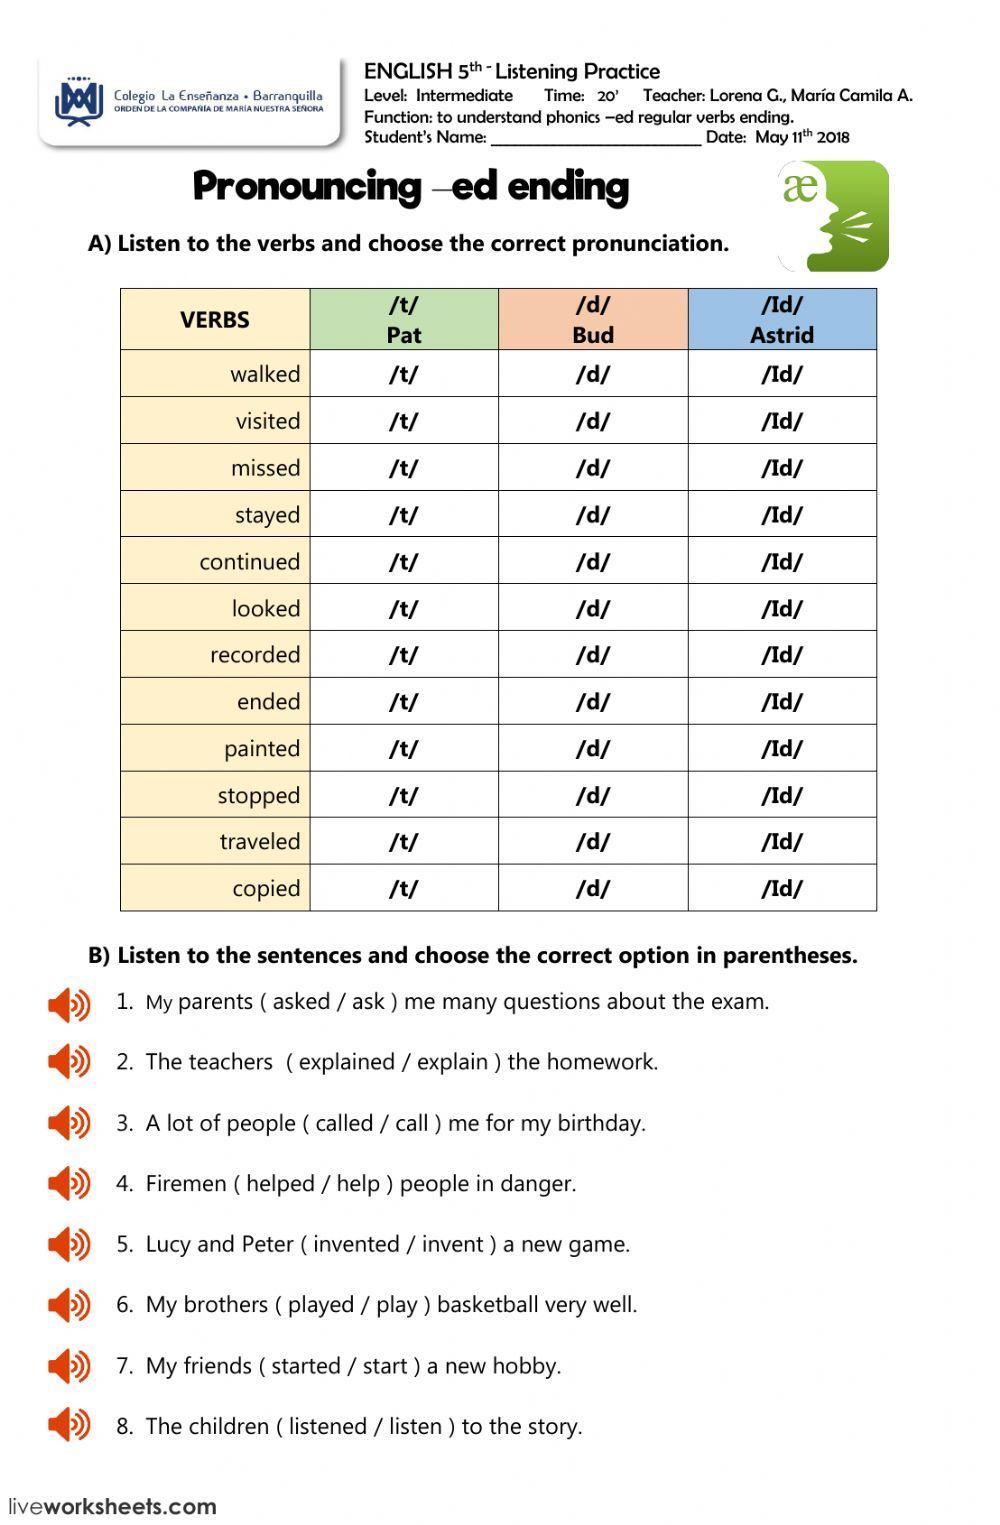 How to Pronounce Past Tense Verbs In English Grammar 